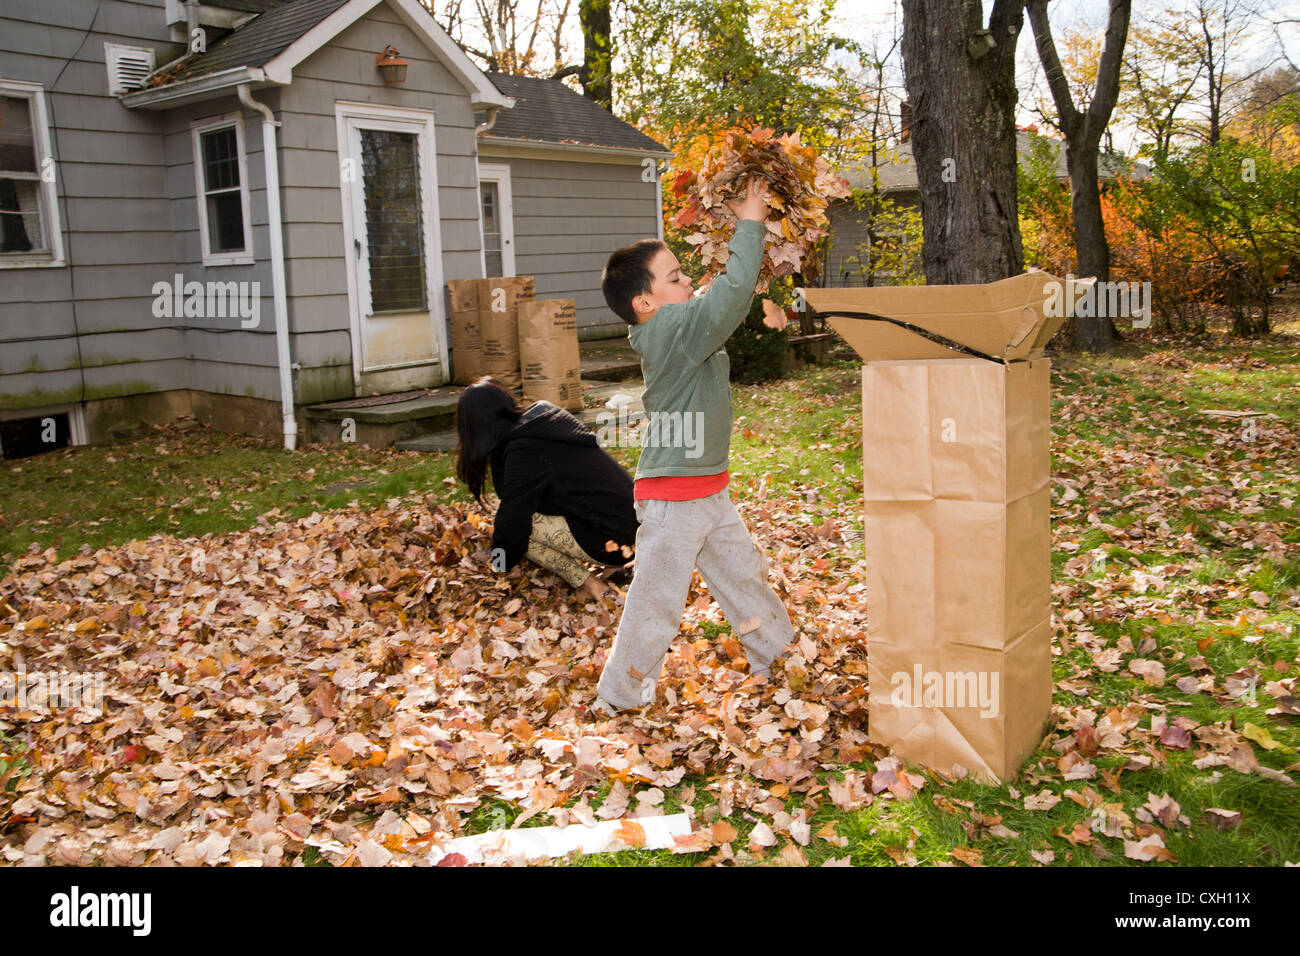 7 Year Old Boy Cleaning The Backyard And Putting Leaves Into A Bag Stock Photo Alamy